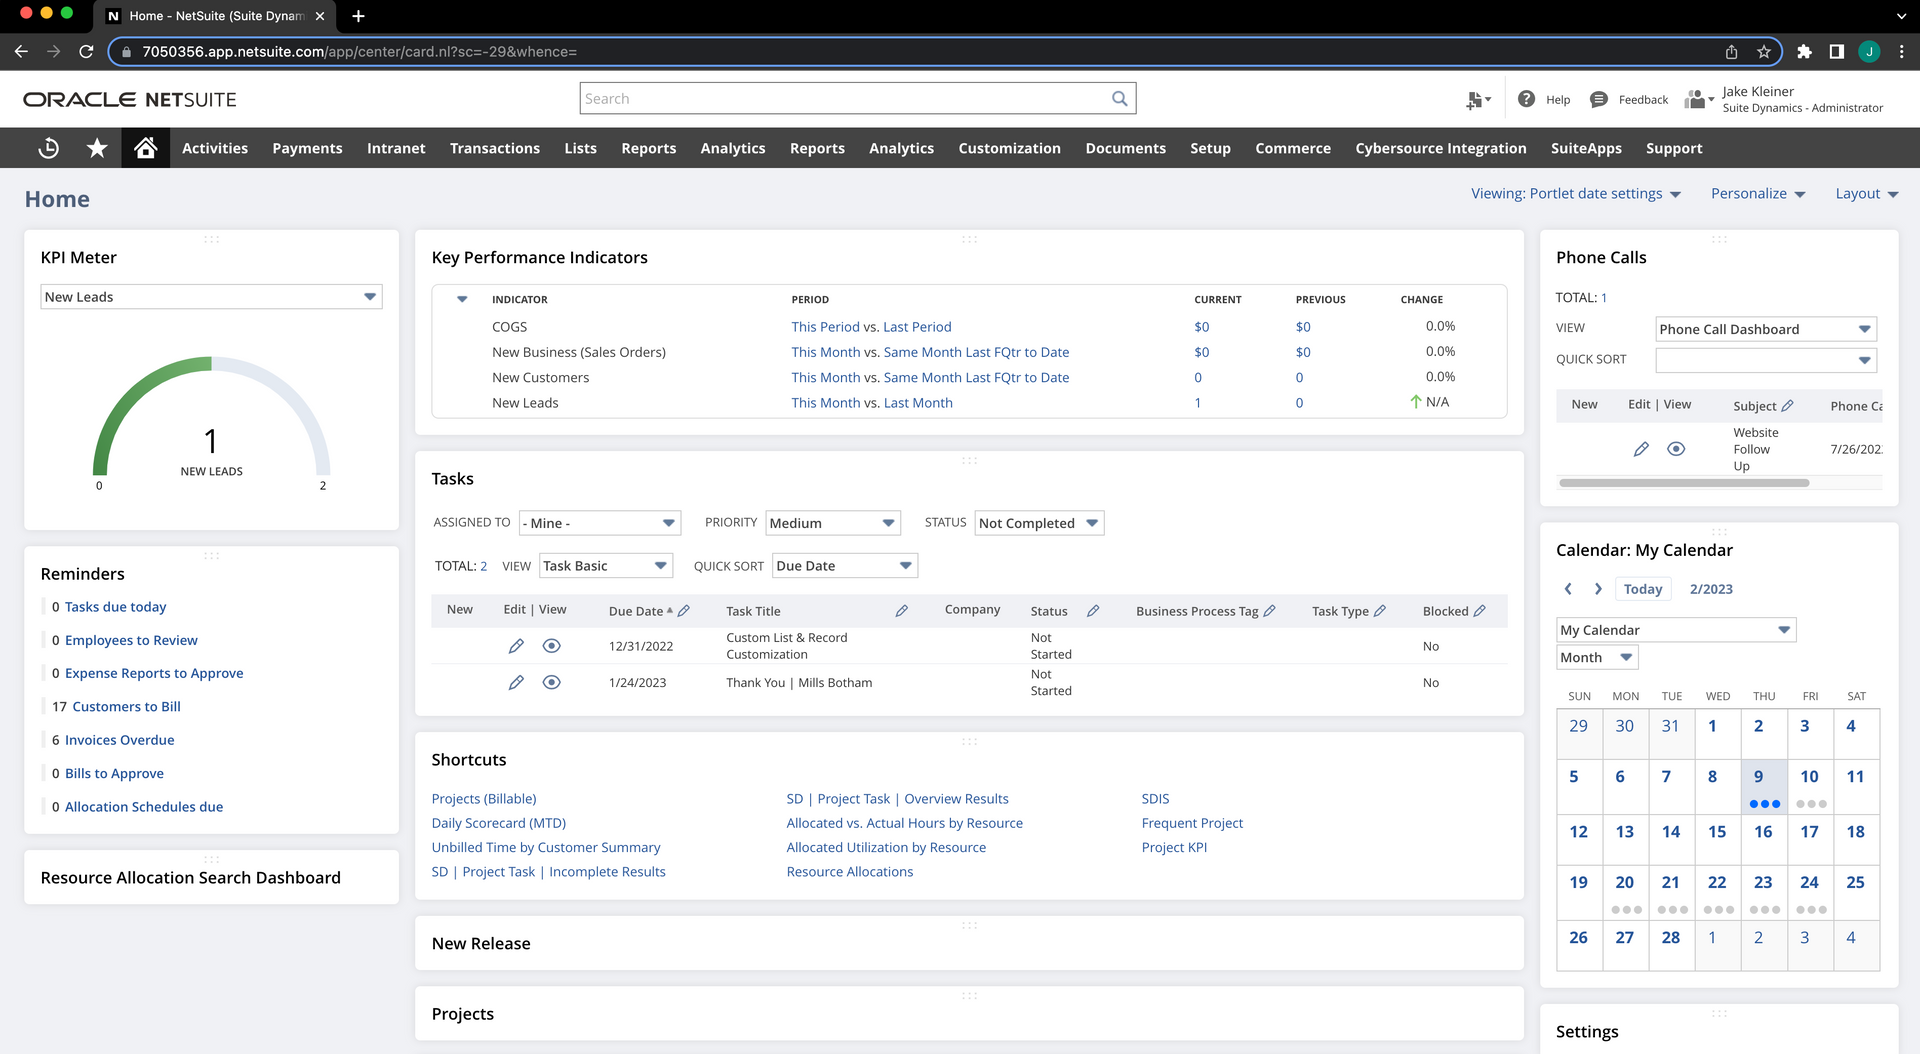 This is a screenshot of an administrator's NetSuite dashboard.